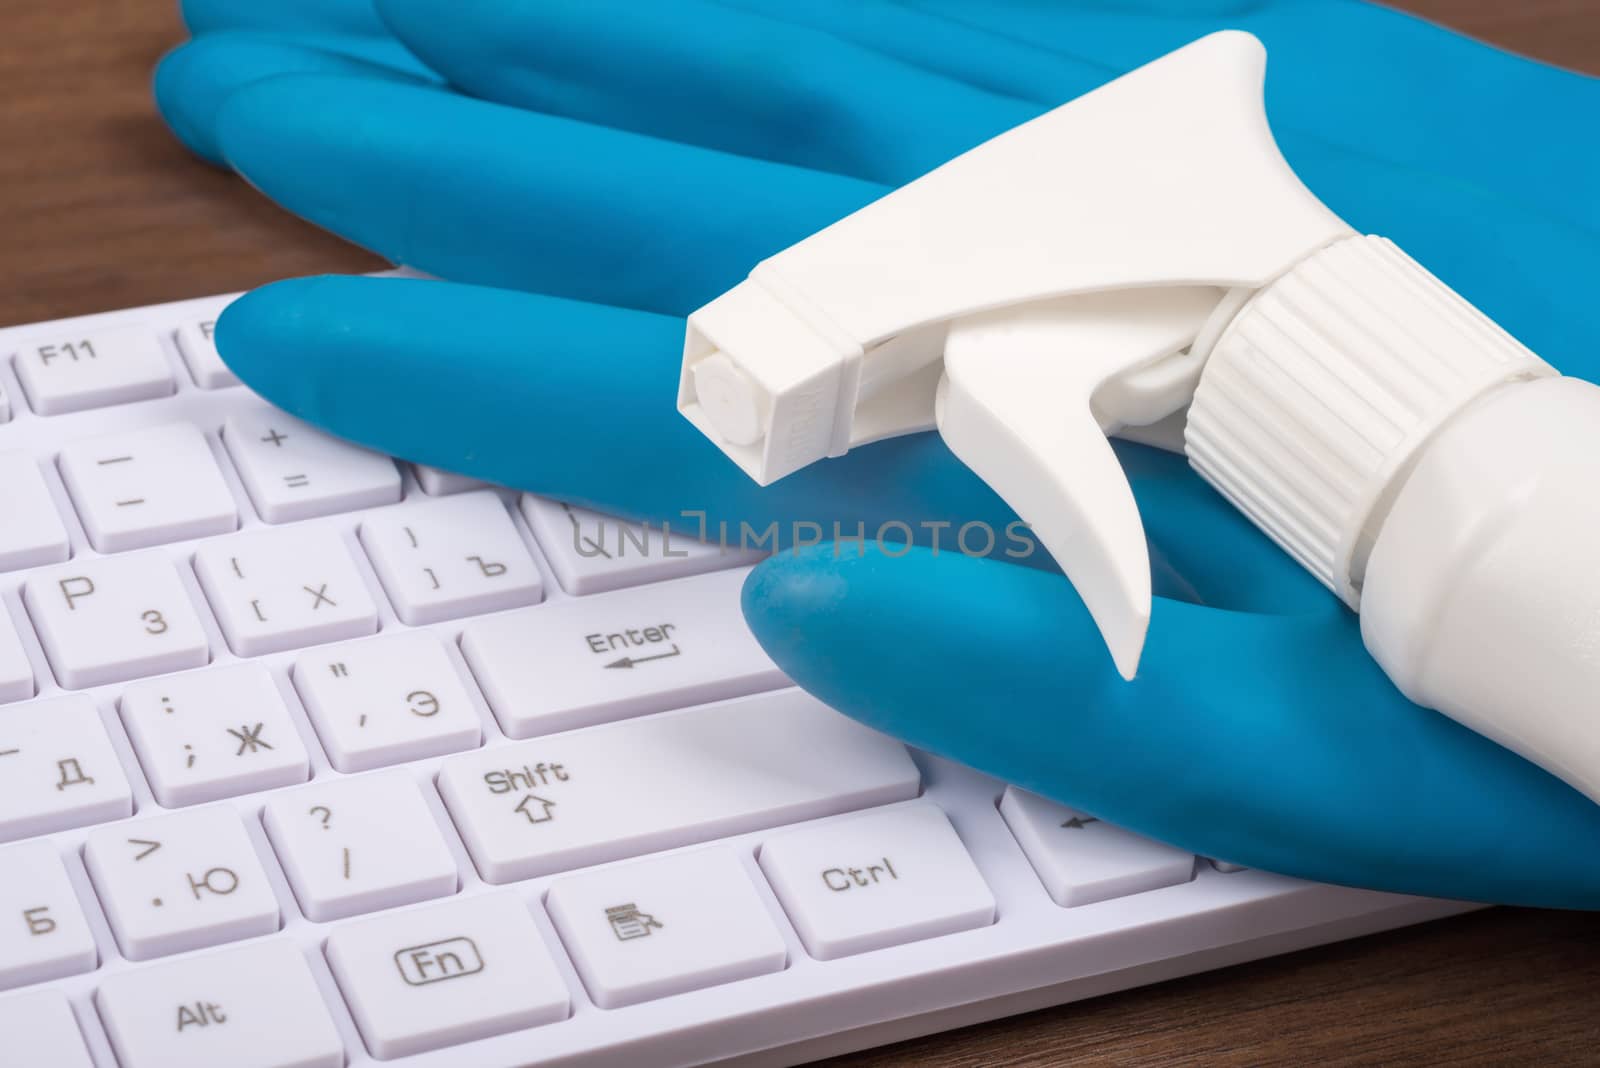 Airbrush with rubber gloves on keyboard by cherezoff